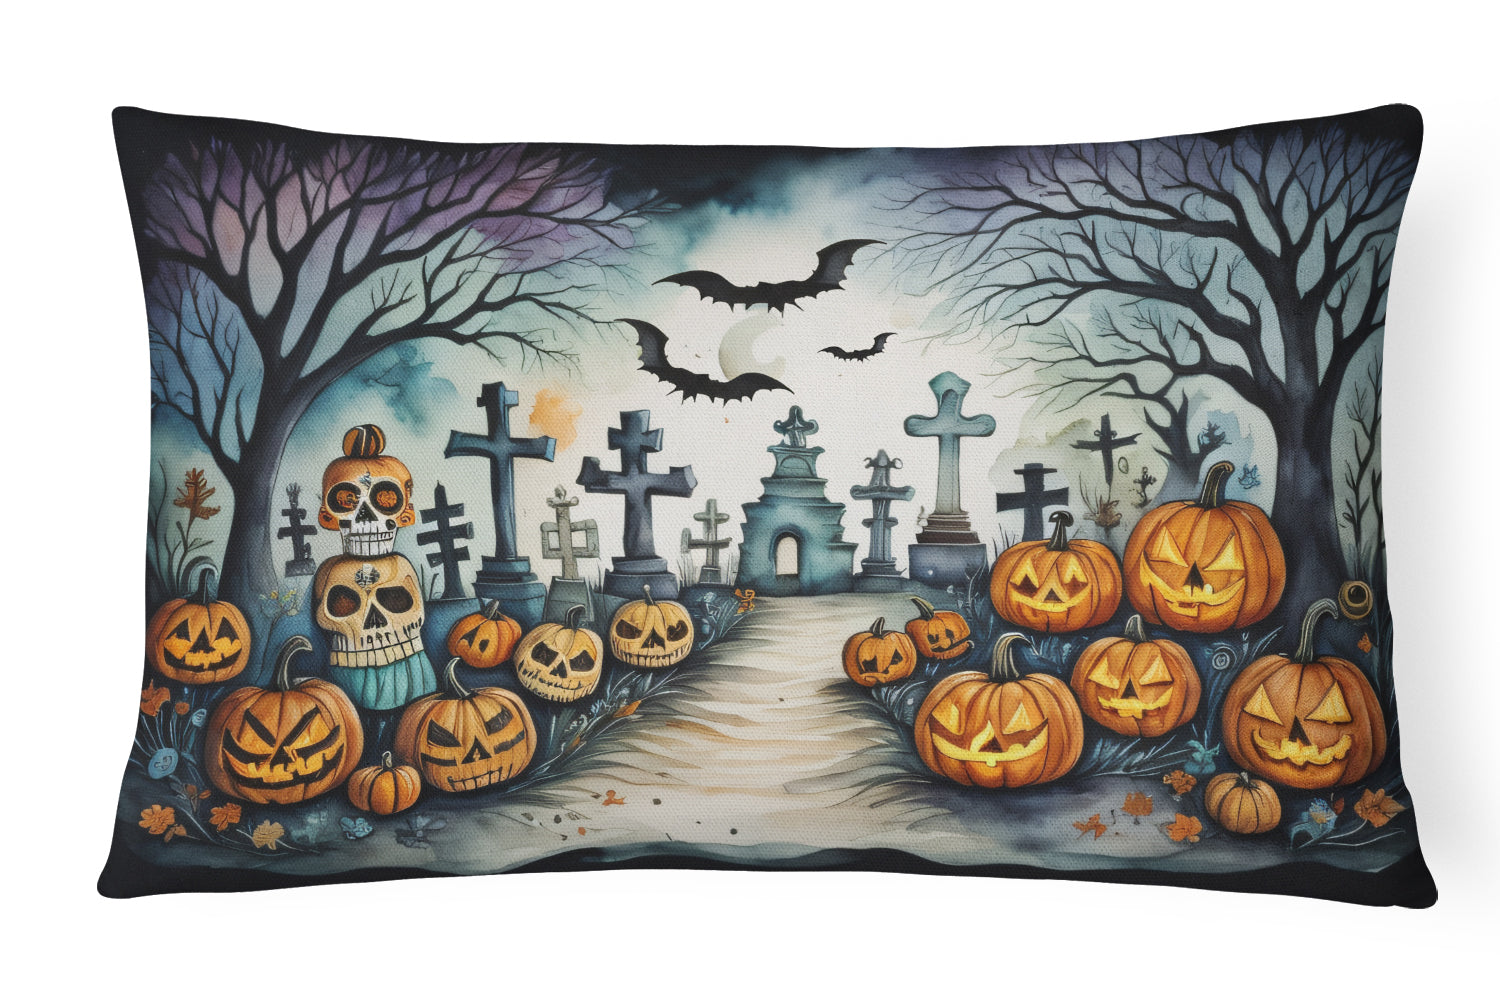 Buy this Day of the Dead Spooky Halloween Fabric Decorative Pillow